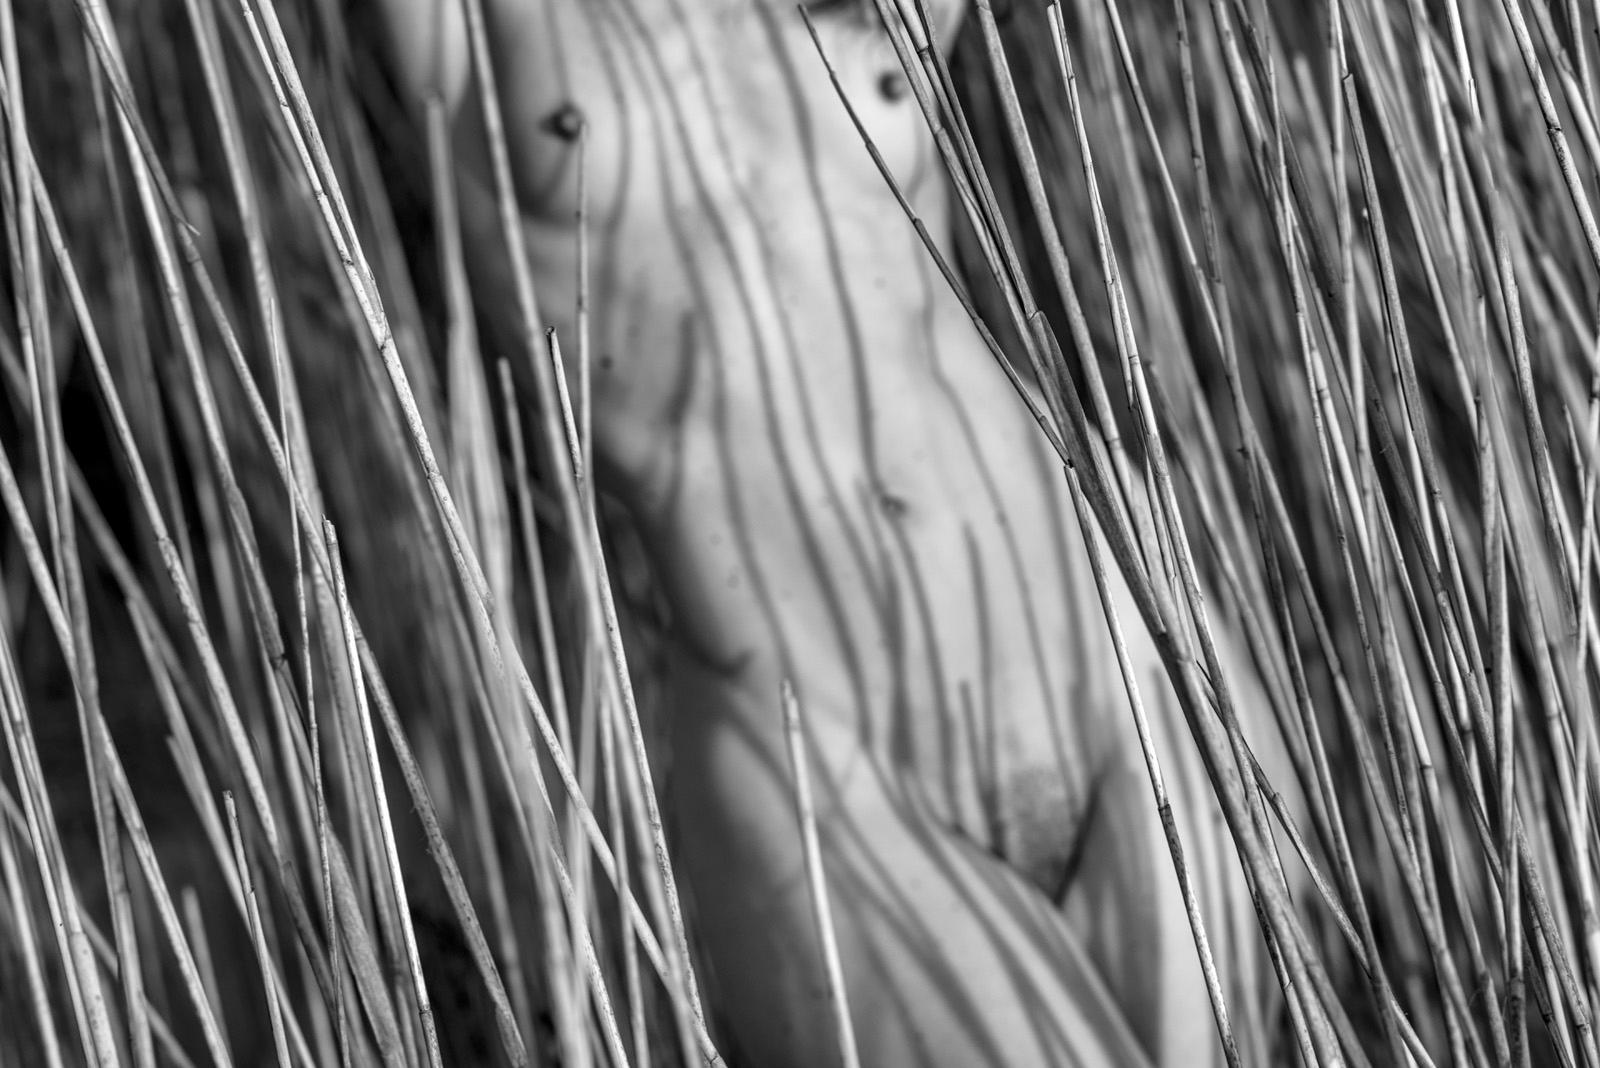 "Torso in Reeds"- Abstract Black & White Fine Art Nude